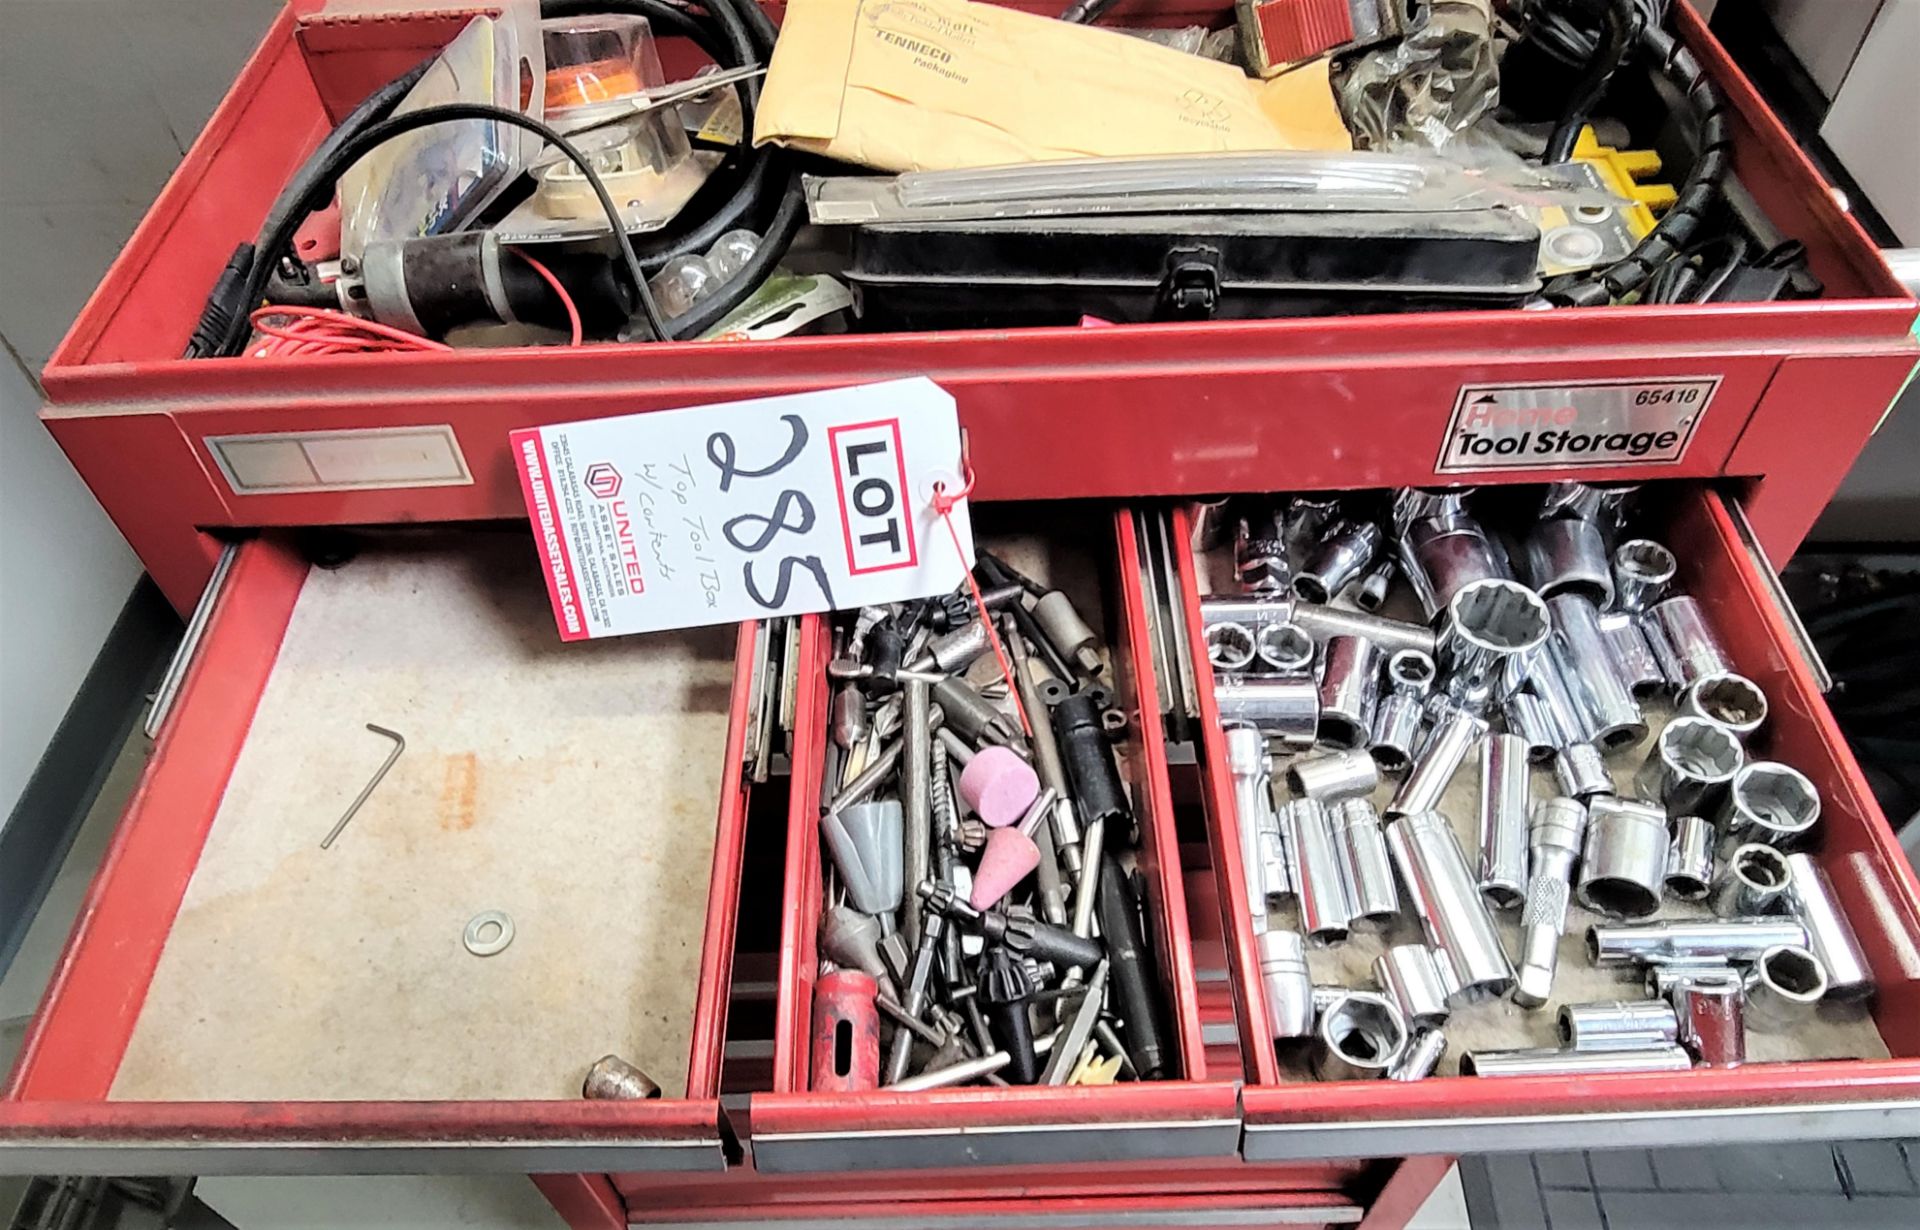 CRAFTSMAN 65418 TOP TOOL BOX, W/ CONTENTS OF ASSORTED HAND TOOLS - Image 3 of 6